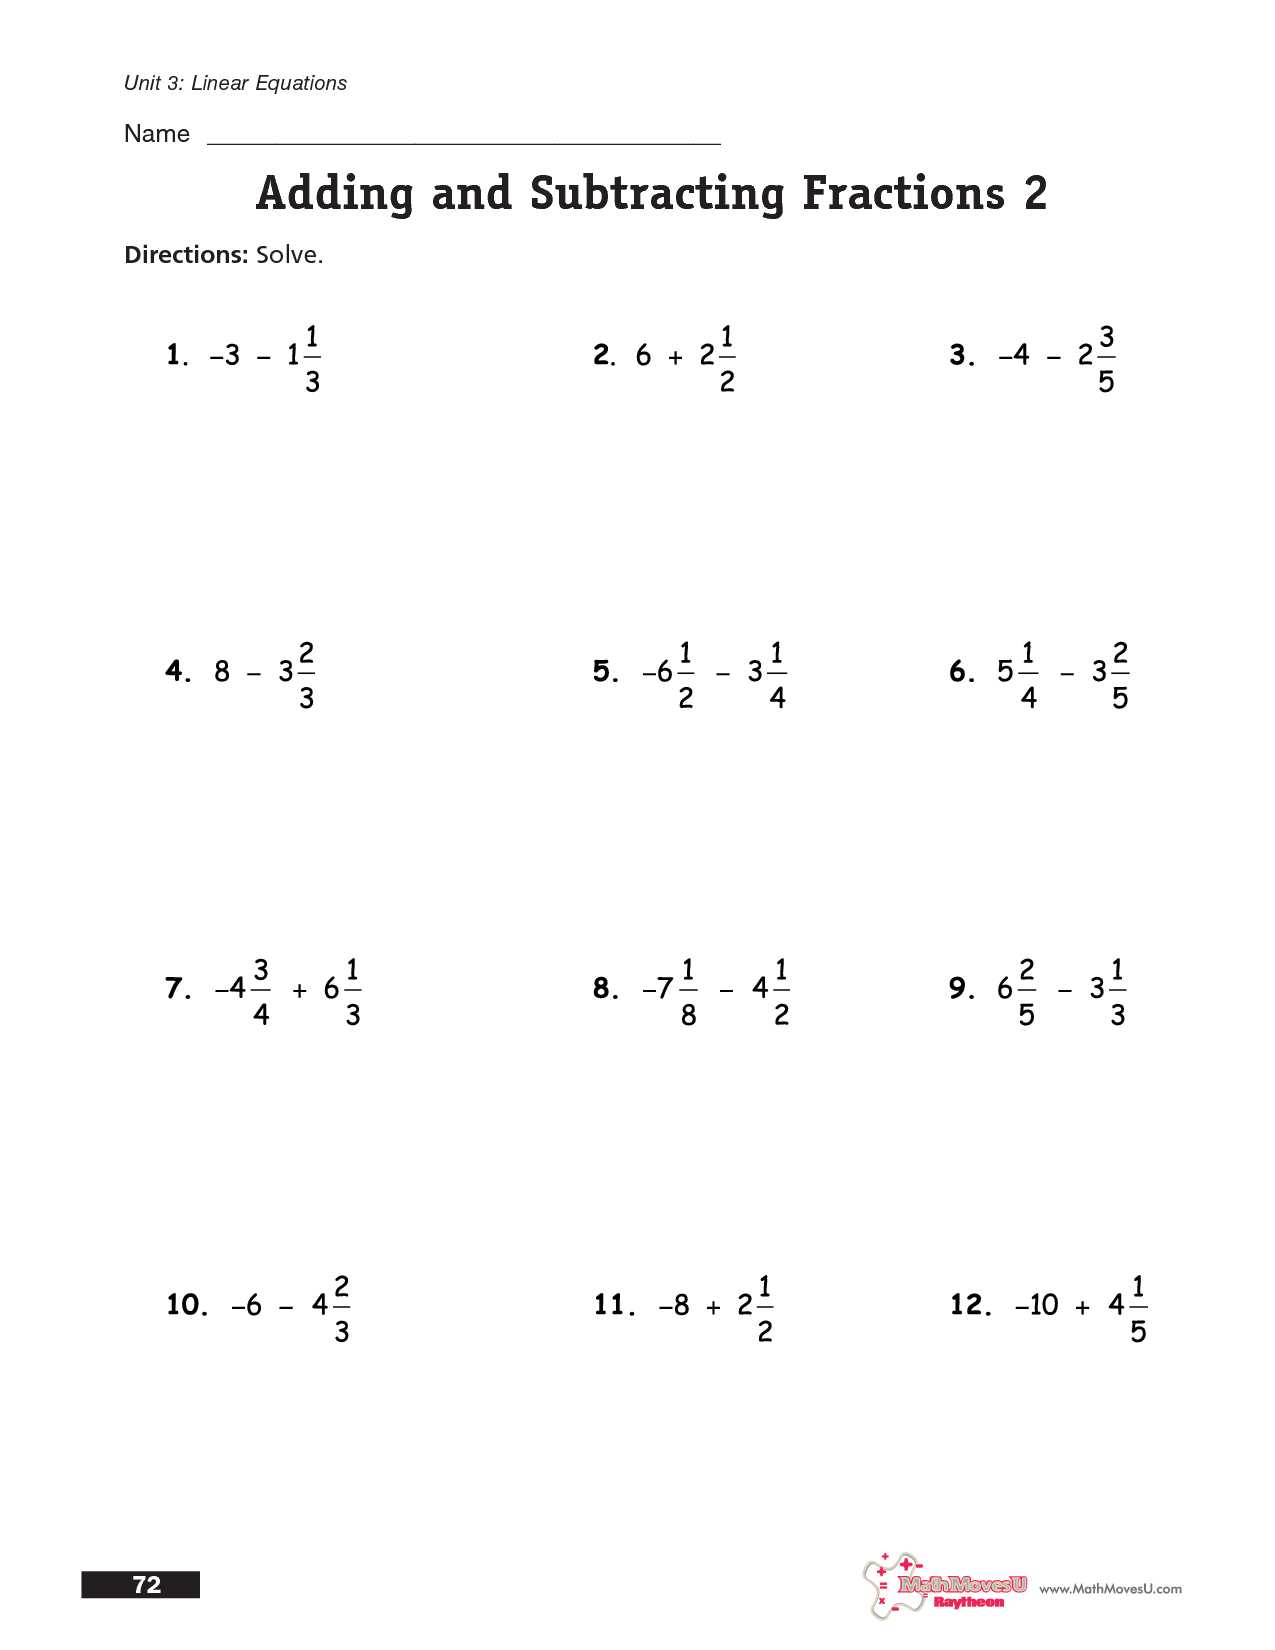 Solving Multi Step Equations Worksheet Answers as Well as Grade 6 Math Fractions Worksheets Luxury Adding and Subtracting